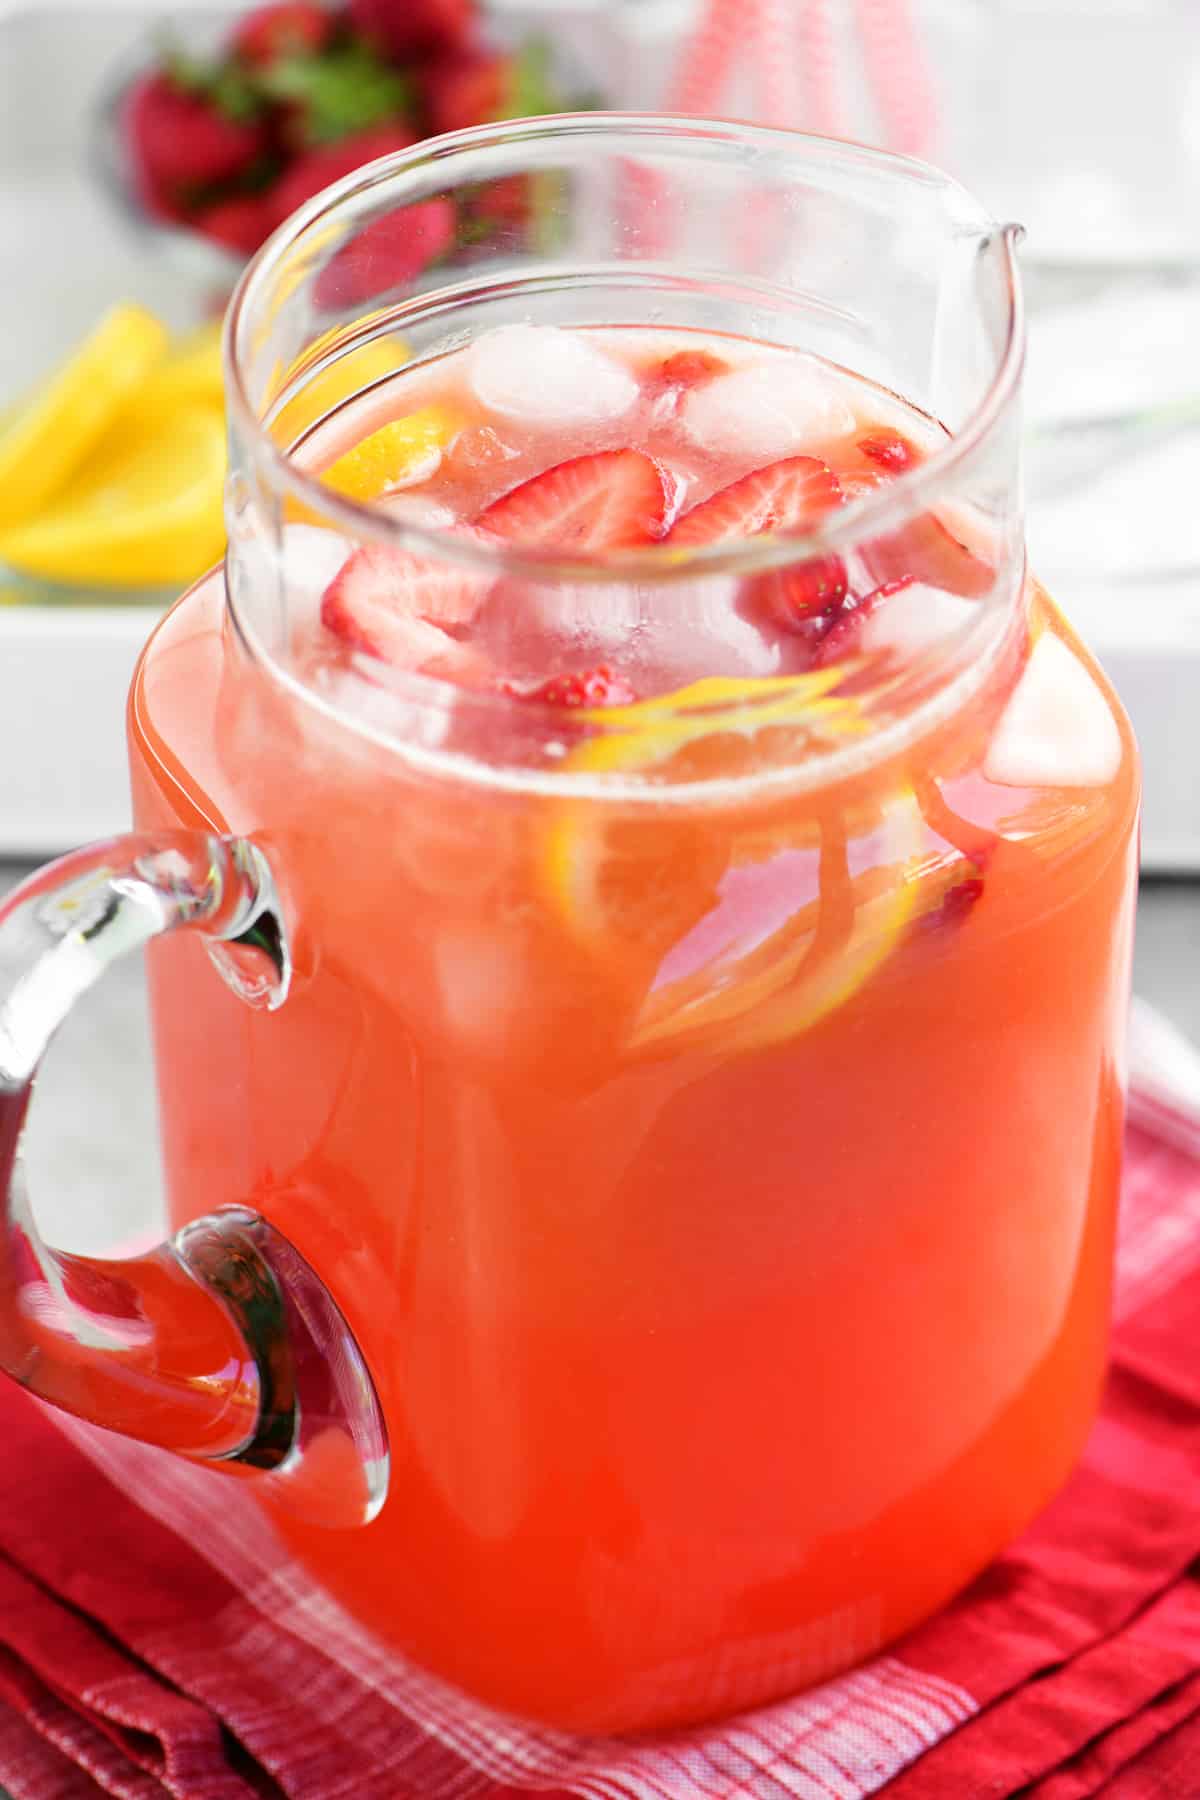 a glass pitcher with lemonade, strawberries and lemons inside